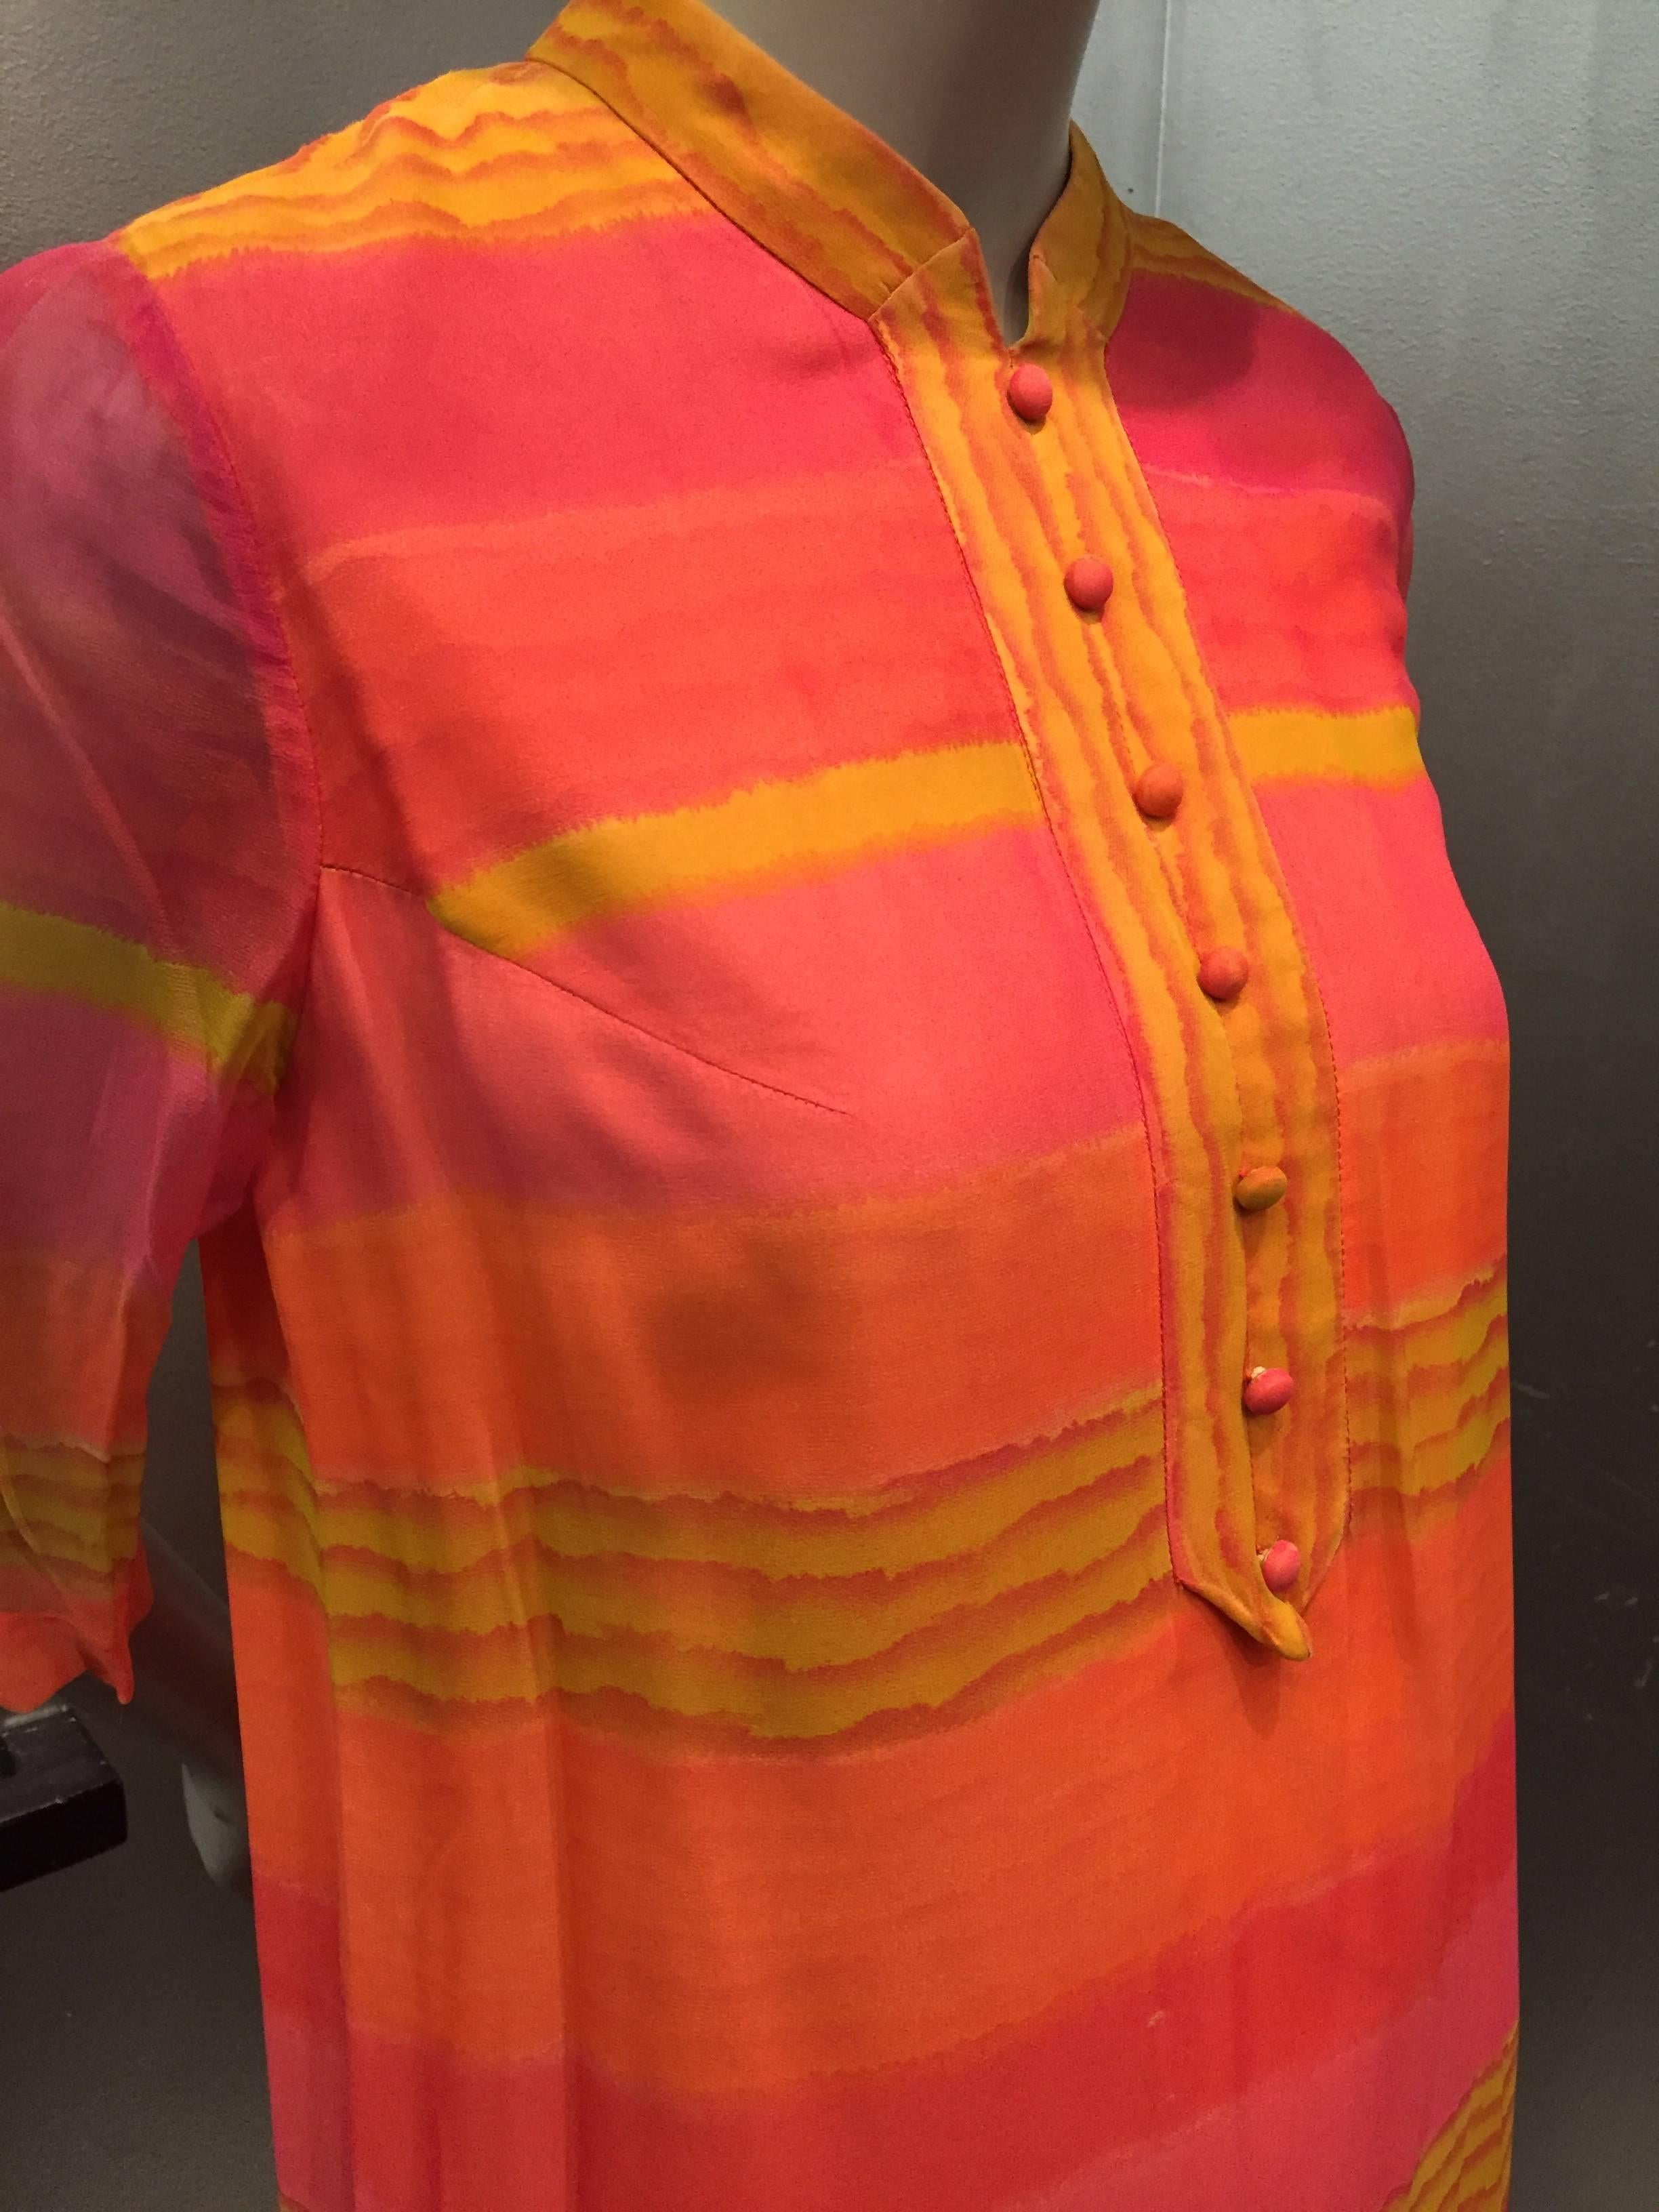 A wonderfully vibrant 1960s striped silk chiffon tunic style dress with button placket at front.  Fully lined in body, sheer in sleeves. In shades of orange, gold and fuchsia. 